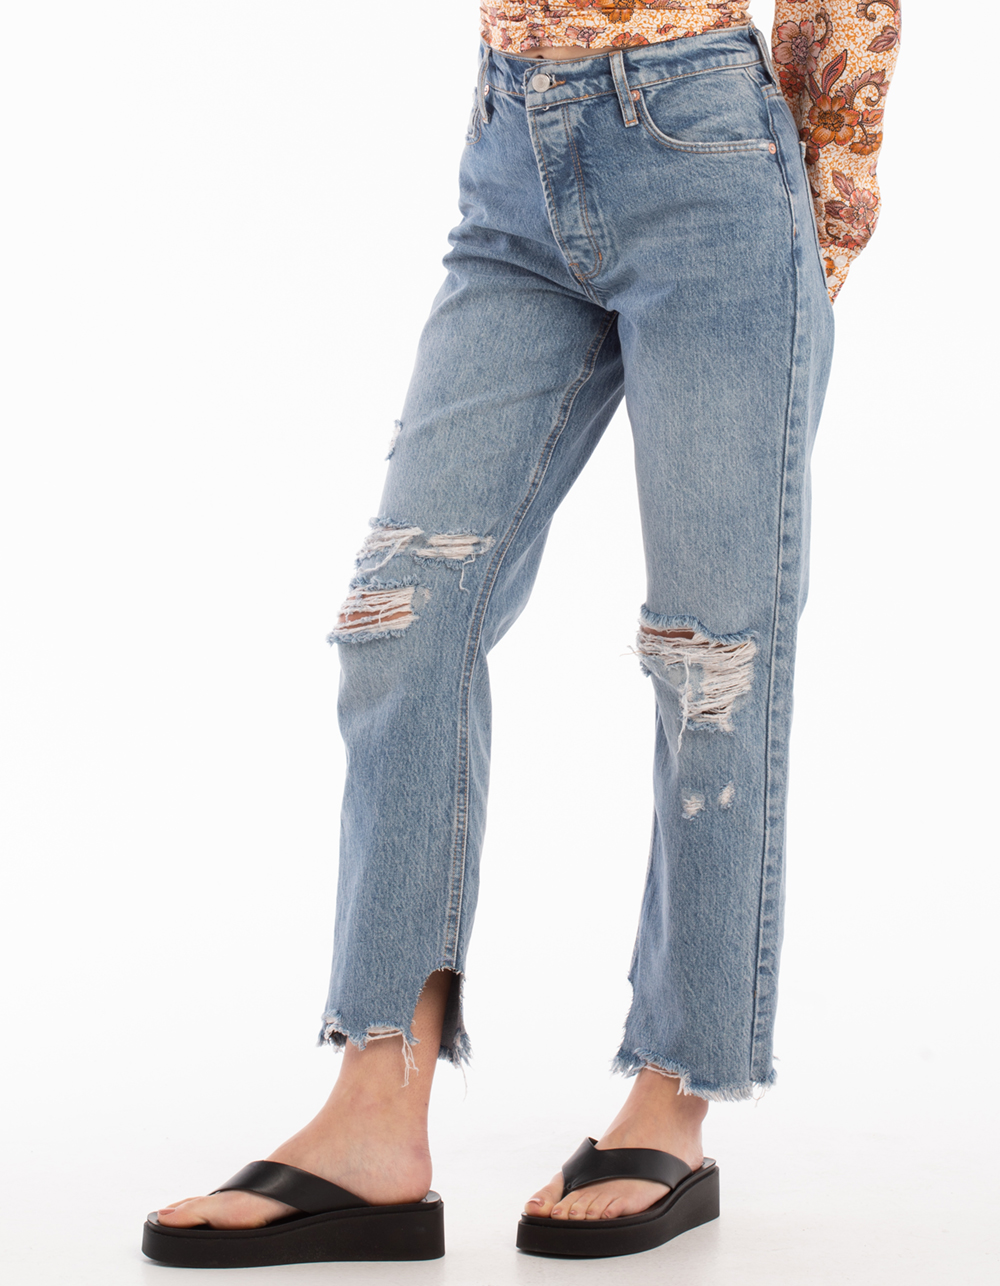 Free People Tapered Baggy Boyfriend Jeans - Black – Willow 31